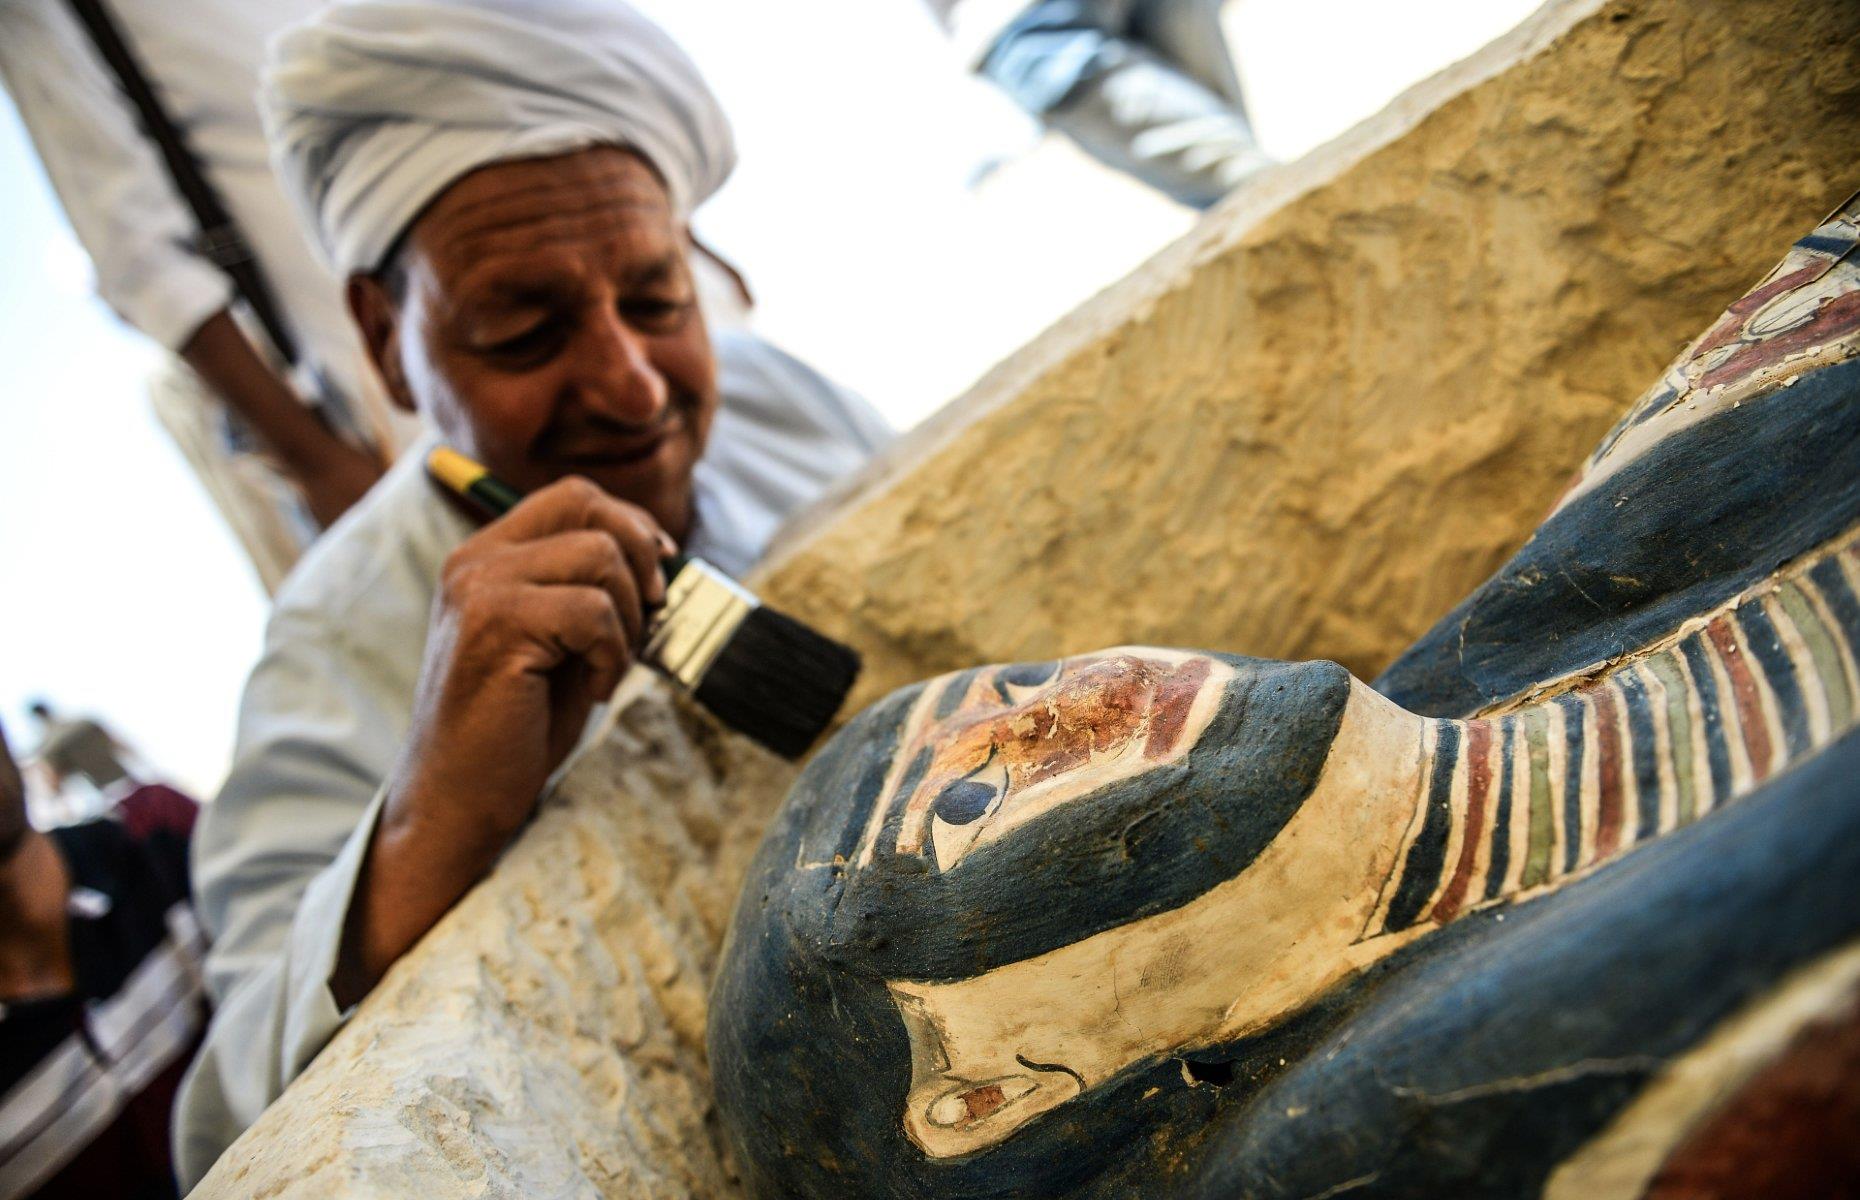 <p>In 2019, a number of mummies and sarcophagi were located in and around the Bent Pyramid. Most of the mummies were in a well-preserved condition, and had been left inside the stone, clay and wooden sarcophagi. A number of wooden funerary masks and instruments for cutting stone were also discovered at the site. All of the discoveries have been dated to the Late Period (664–332 BC), which date much later than King Sneferu’s reign; this timeframe was considered as one of the final periods of Egyptian rule before the Persians invaded around 525 BC.</p>